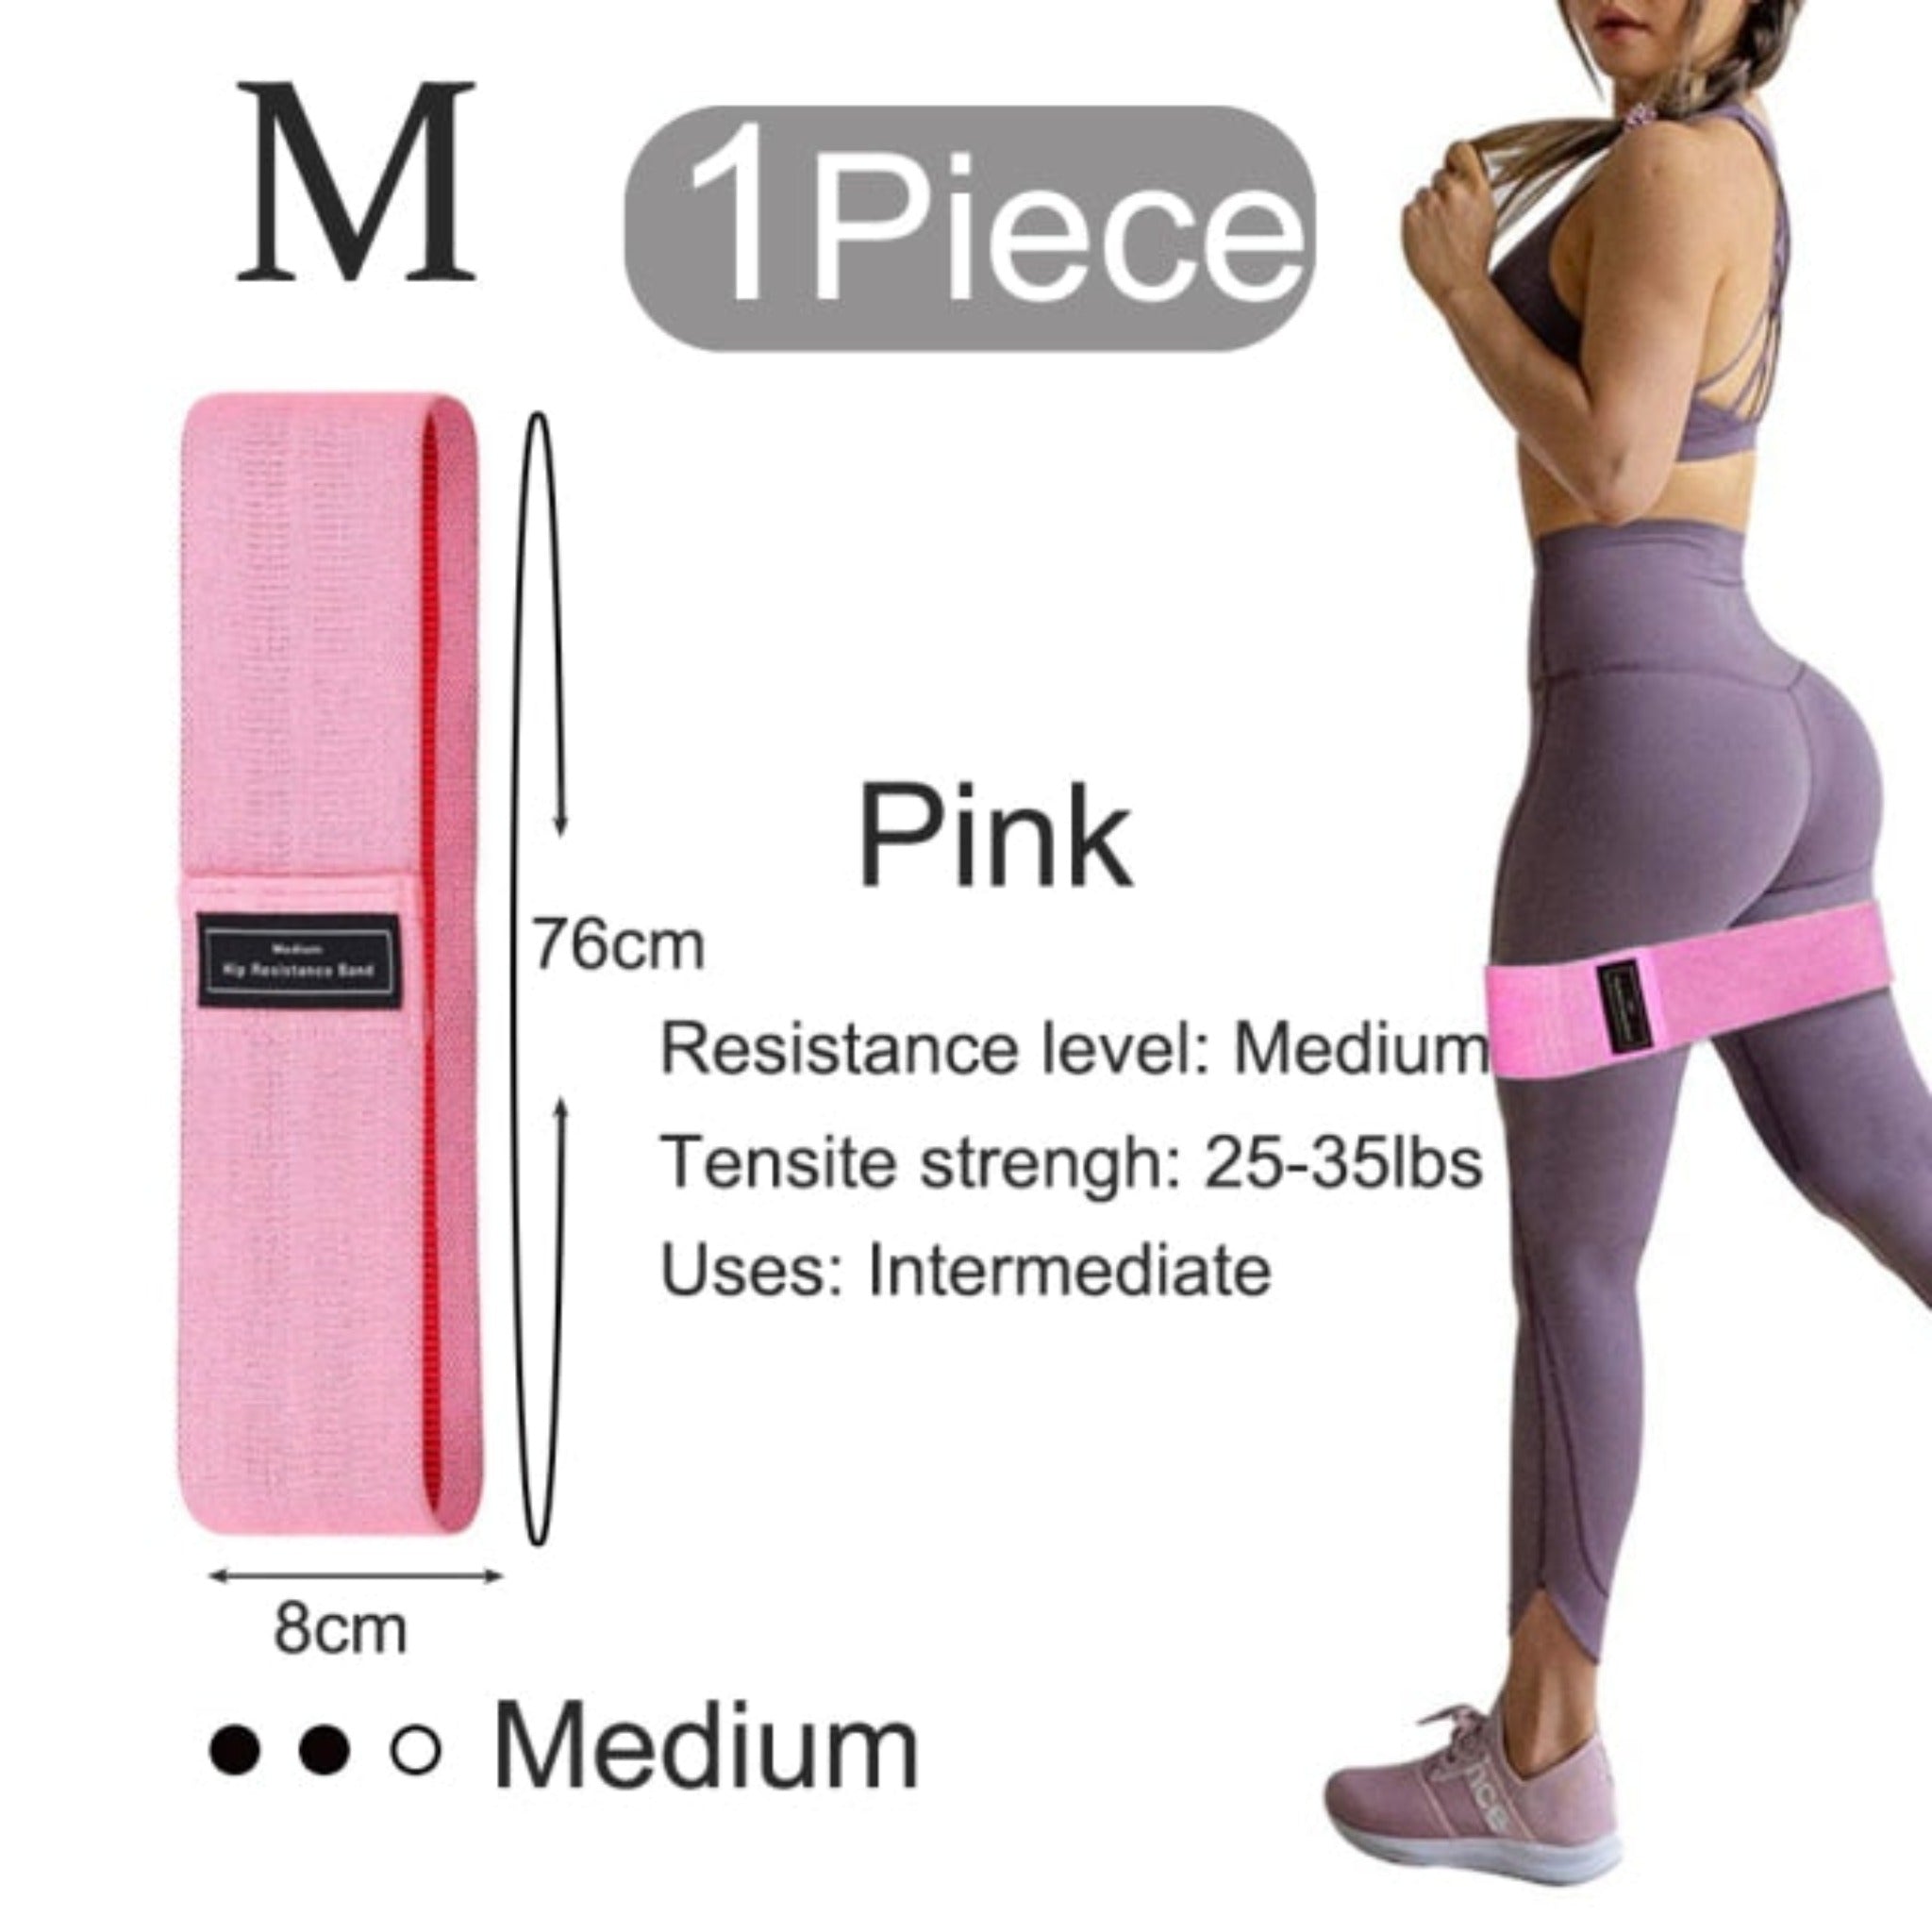 1 piece pink booty band resistance band with white background